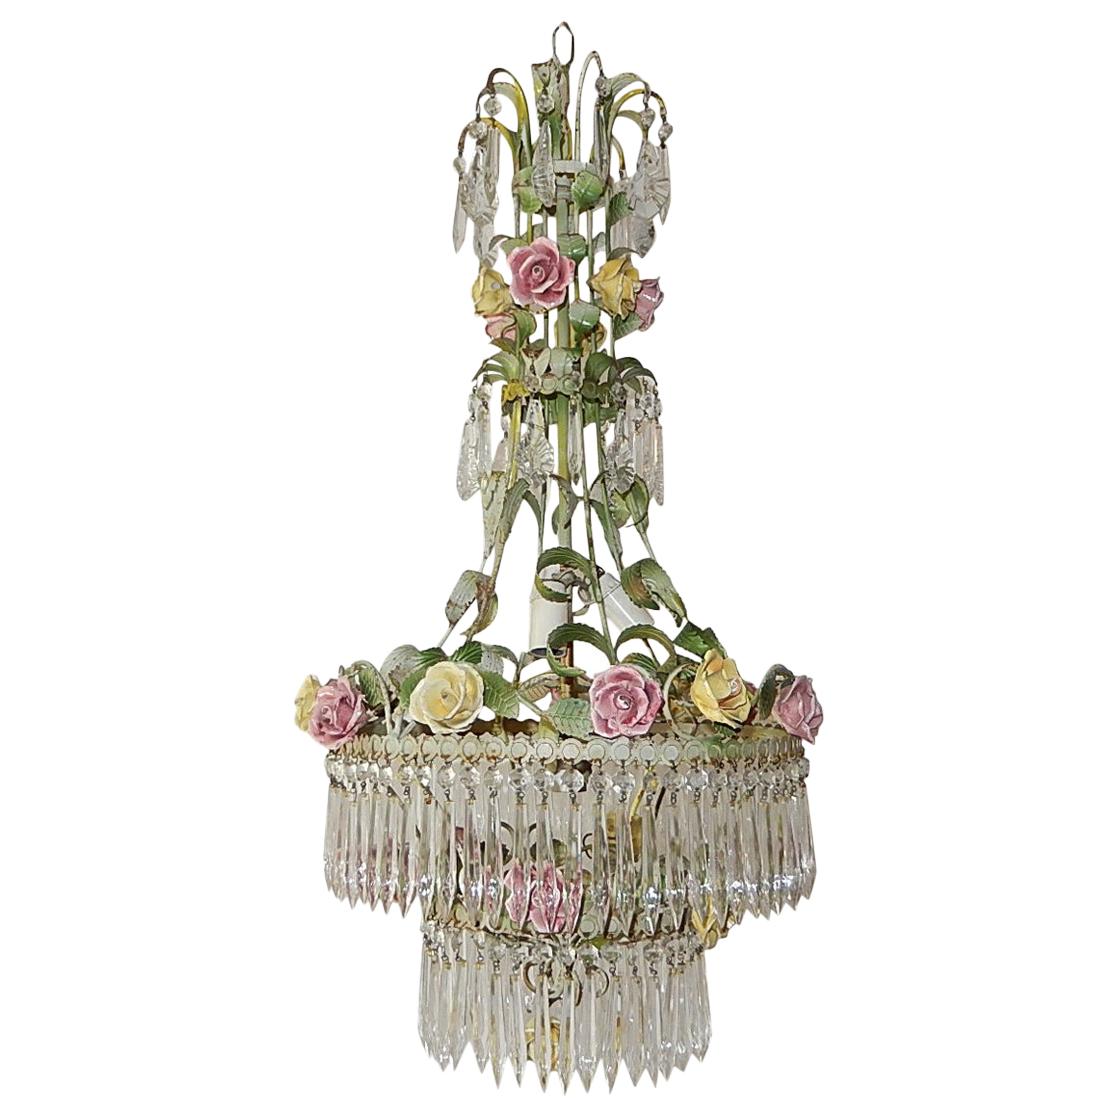 French Porcelain Rose and Crystal Prisms, Four-Tier Chandelier circa 1940